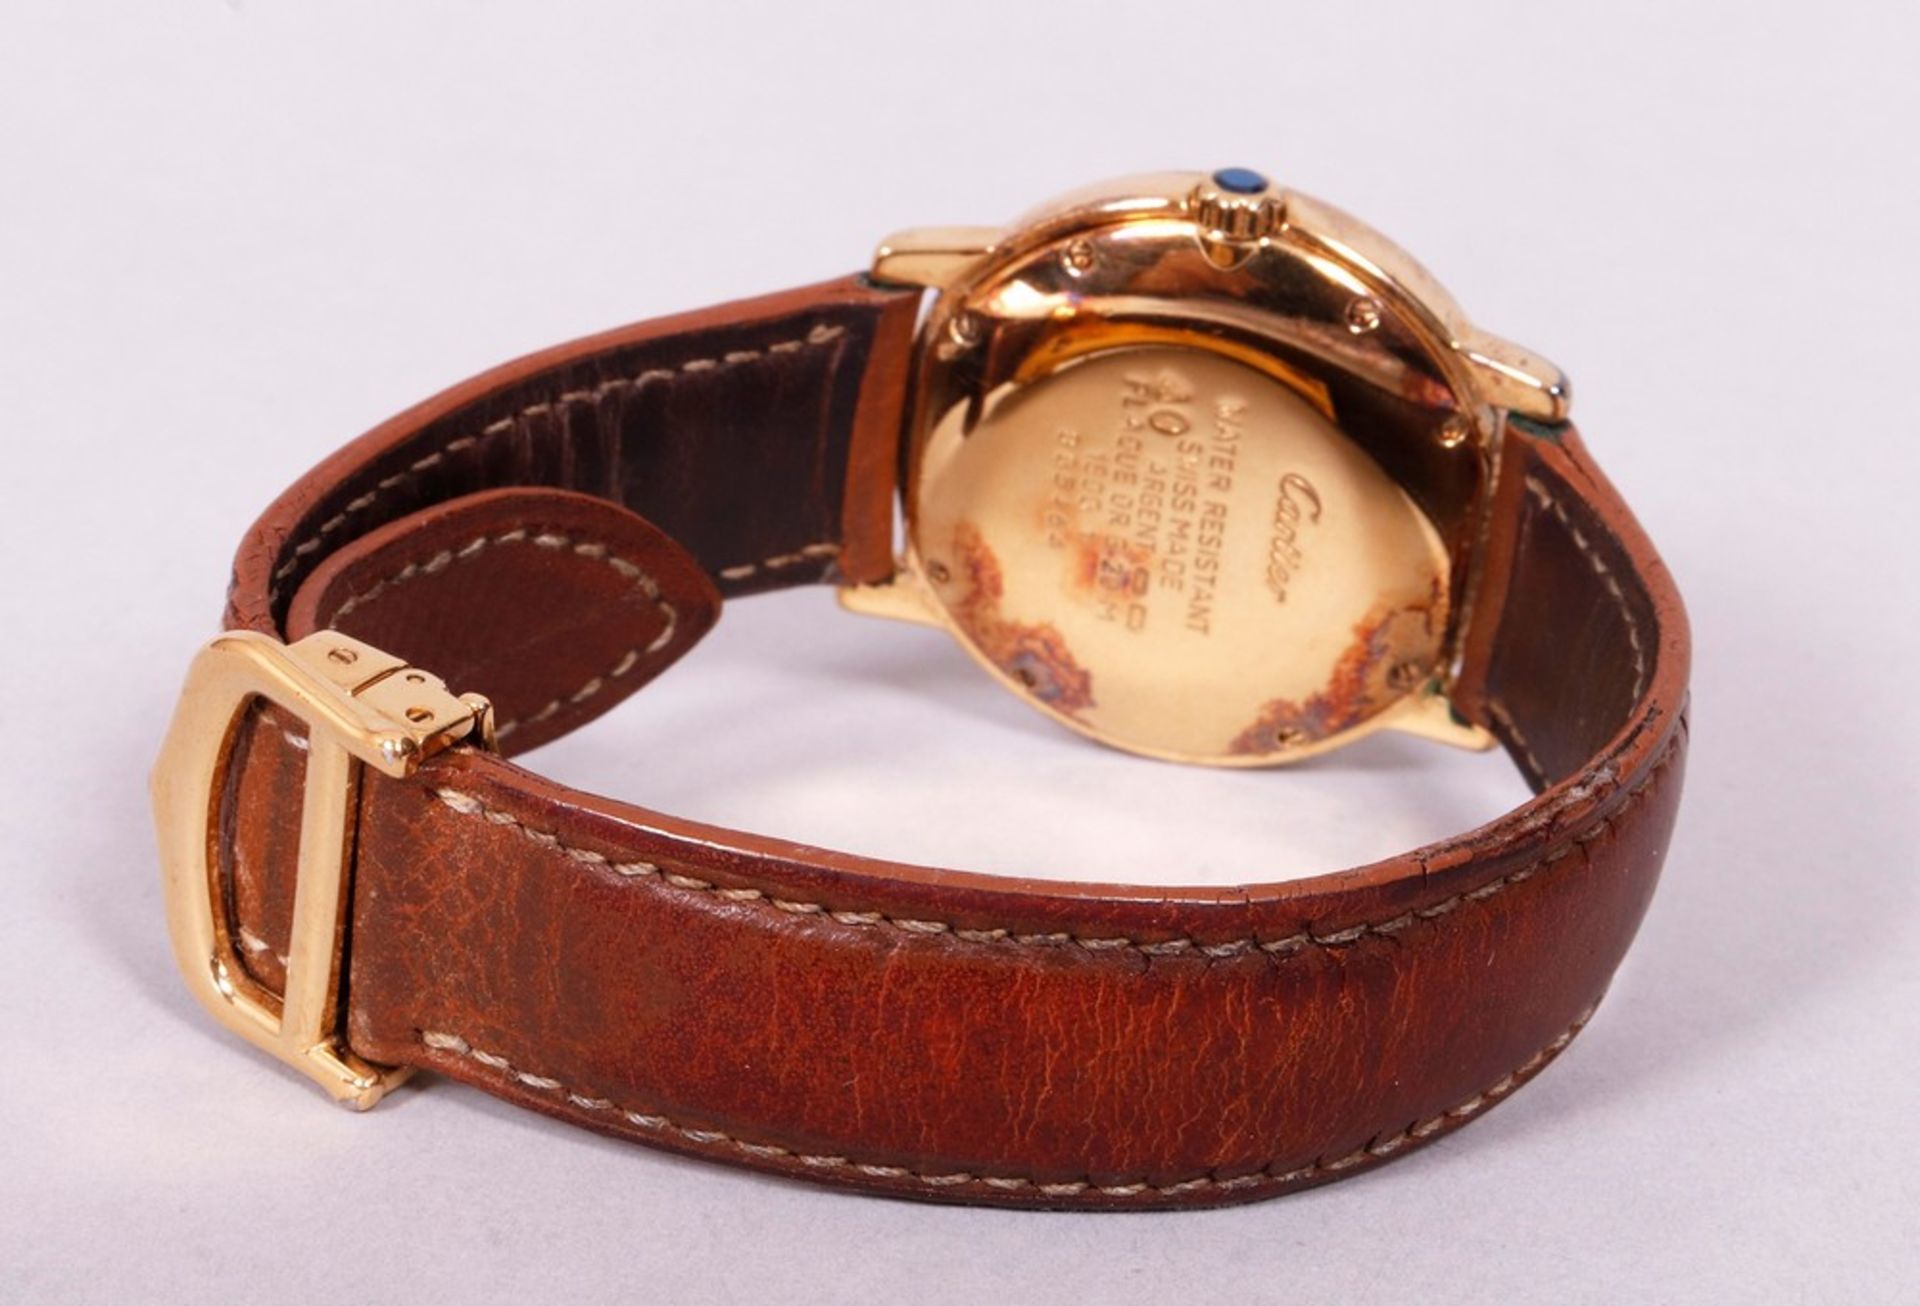 Wristwatch, silver, gilt, Cartier, model Ronde - Image 3 of 4